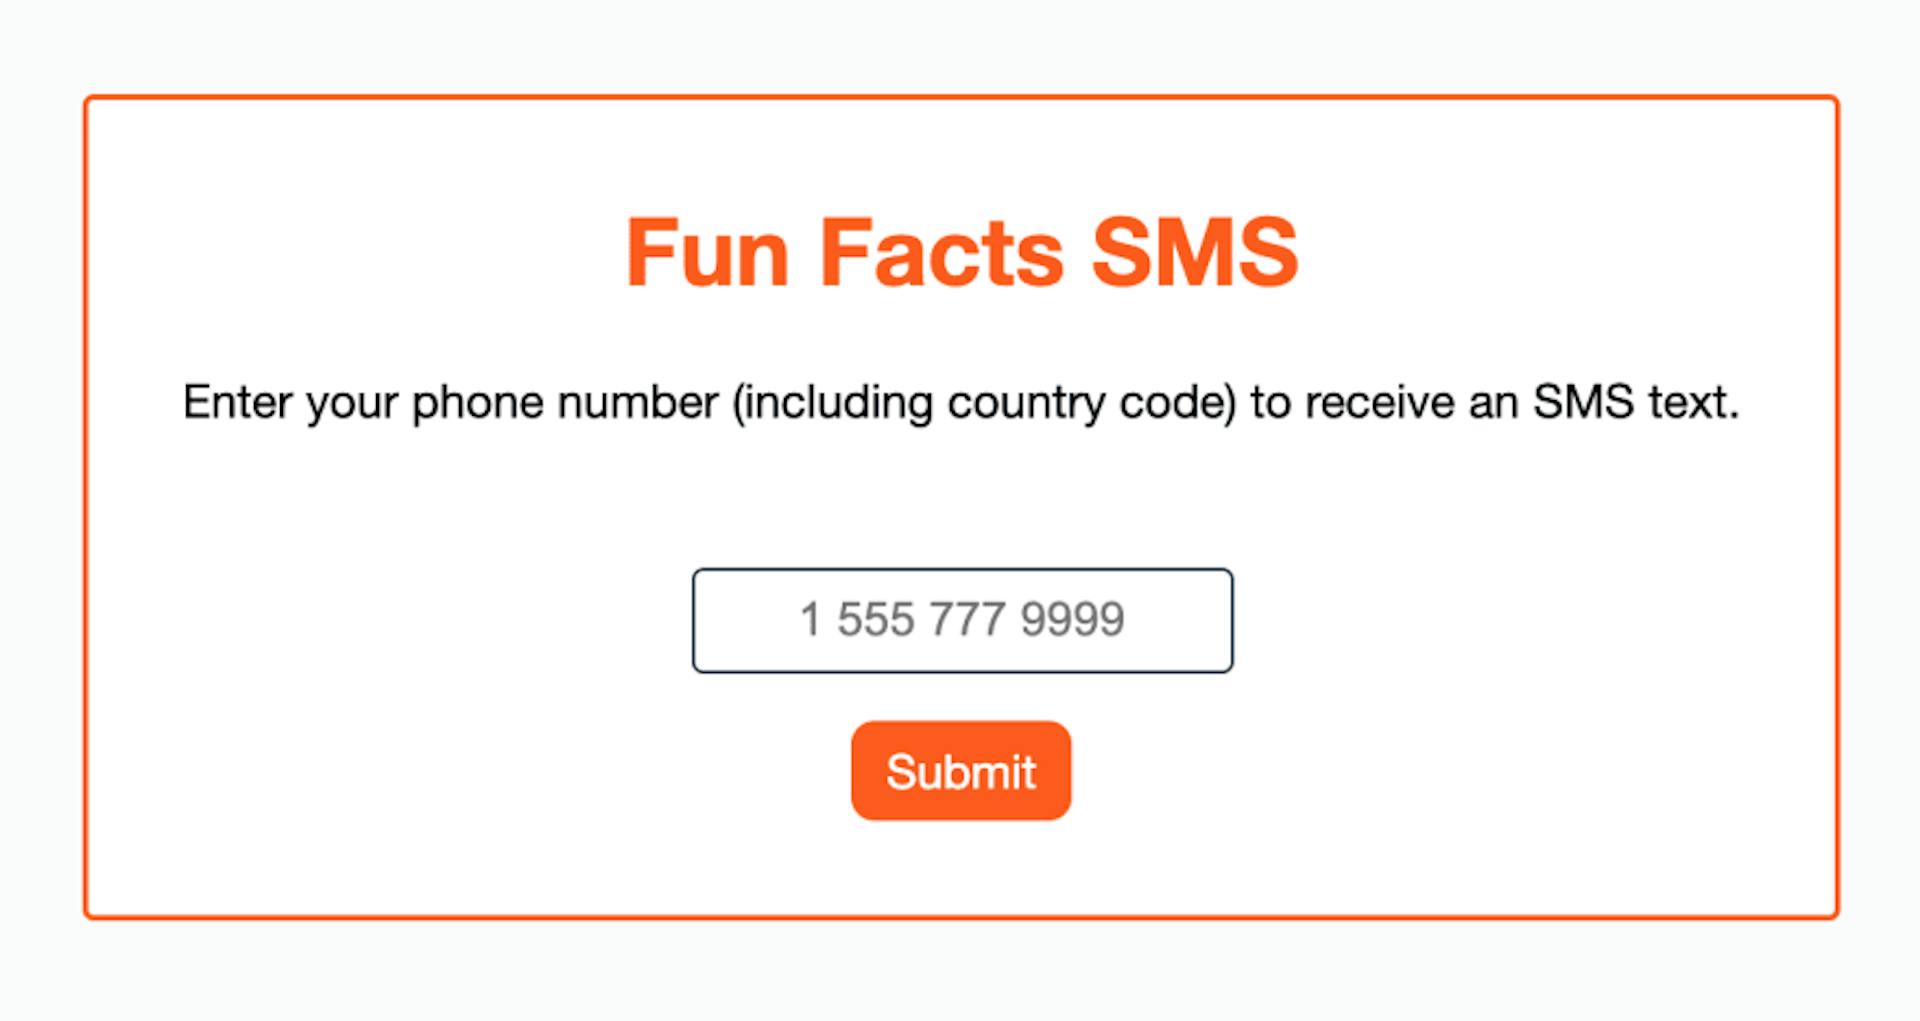 Demo app: Enter your phone number to receive an SMS text